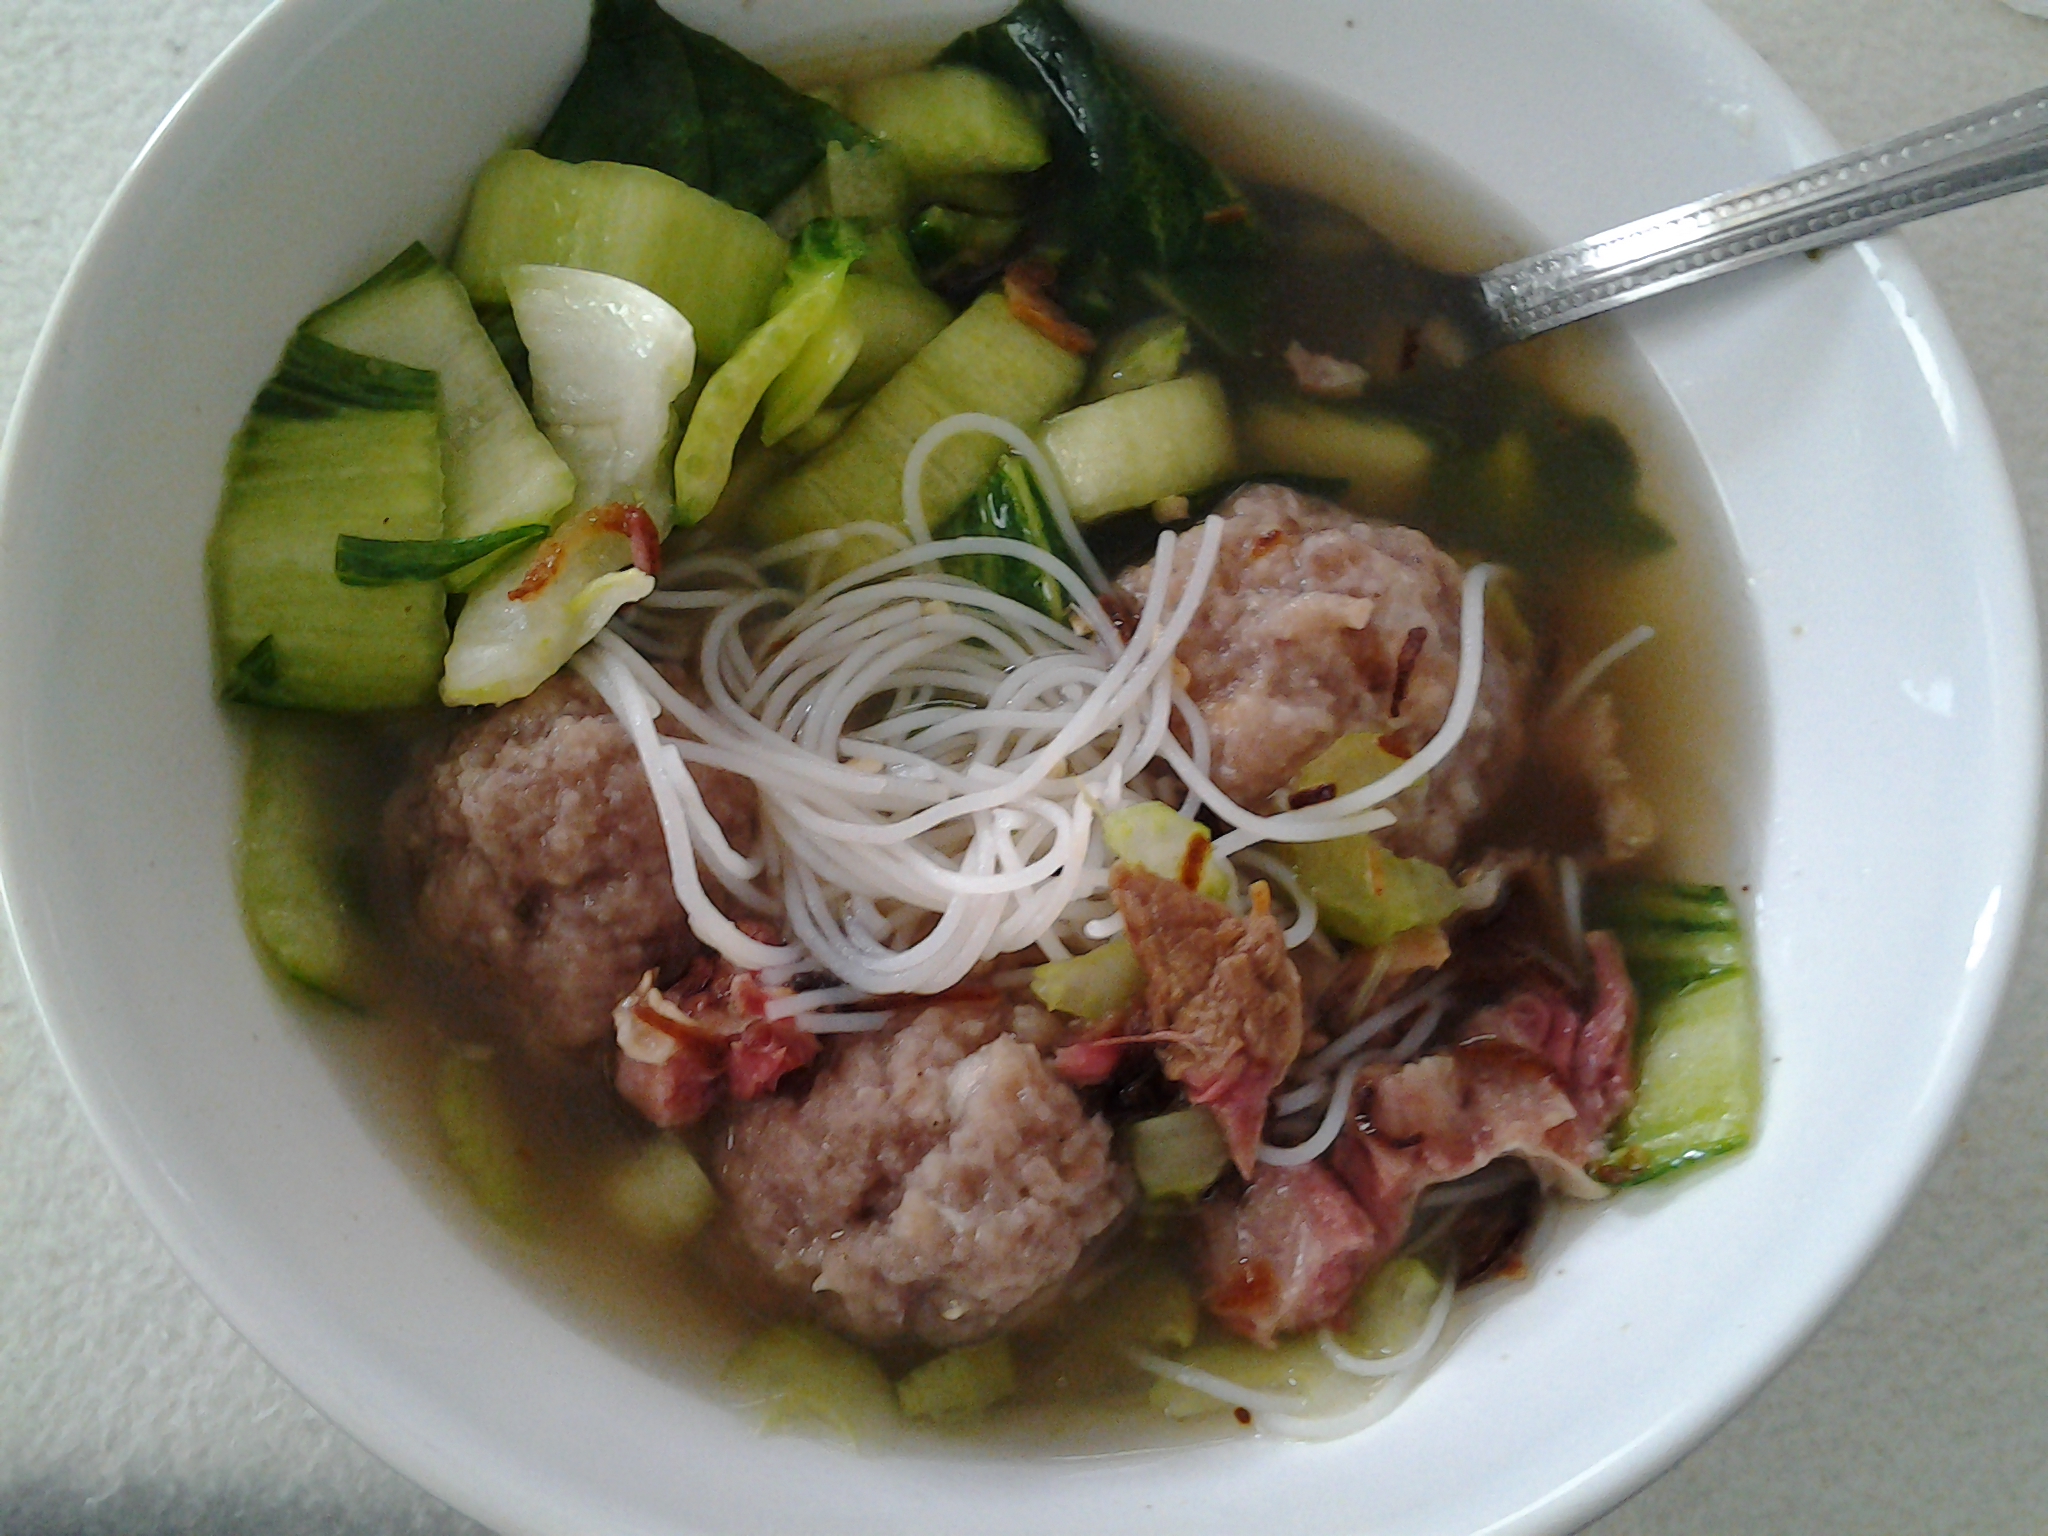  Bakso  Meatball Cooking from Northampton